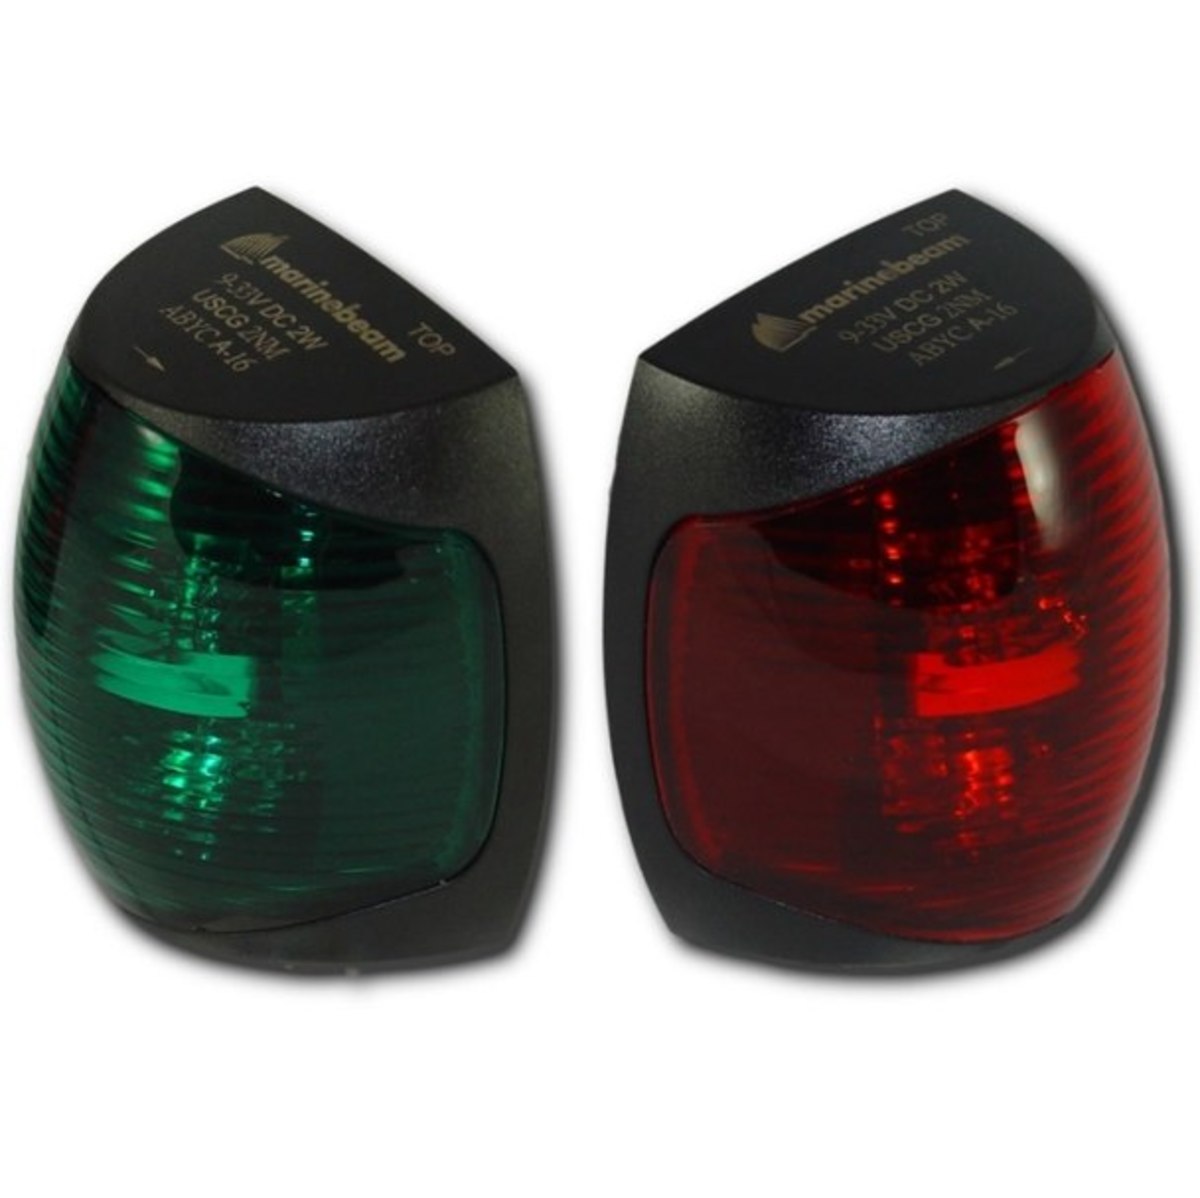 USCG Certified LED Navigation Lights from Marinebeam.